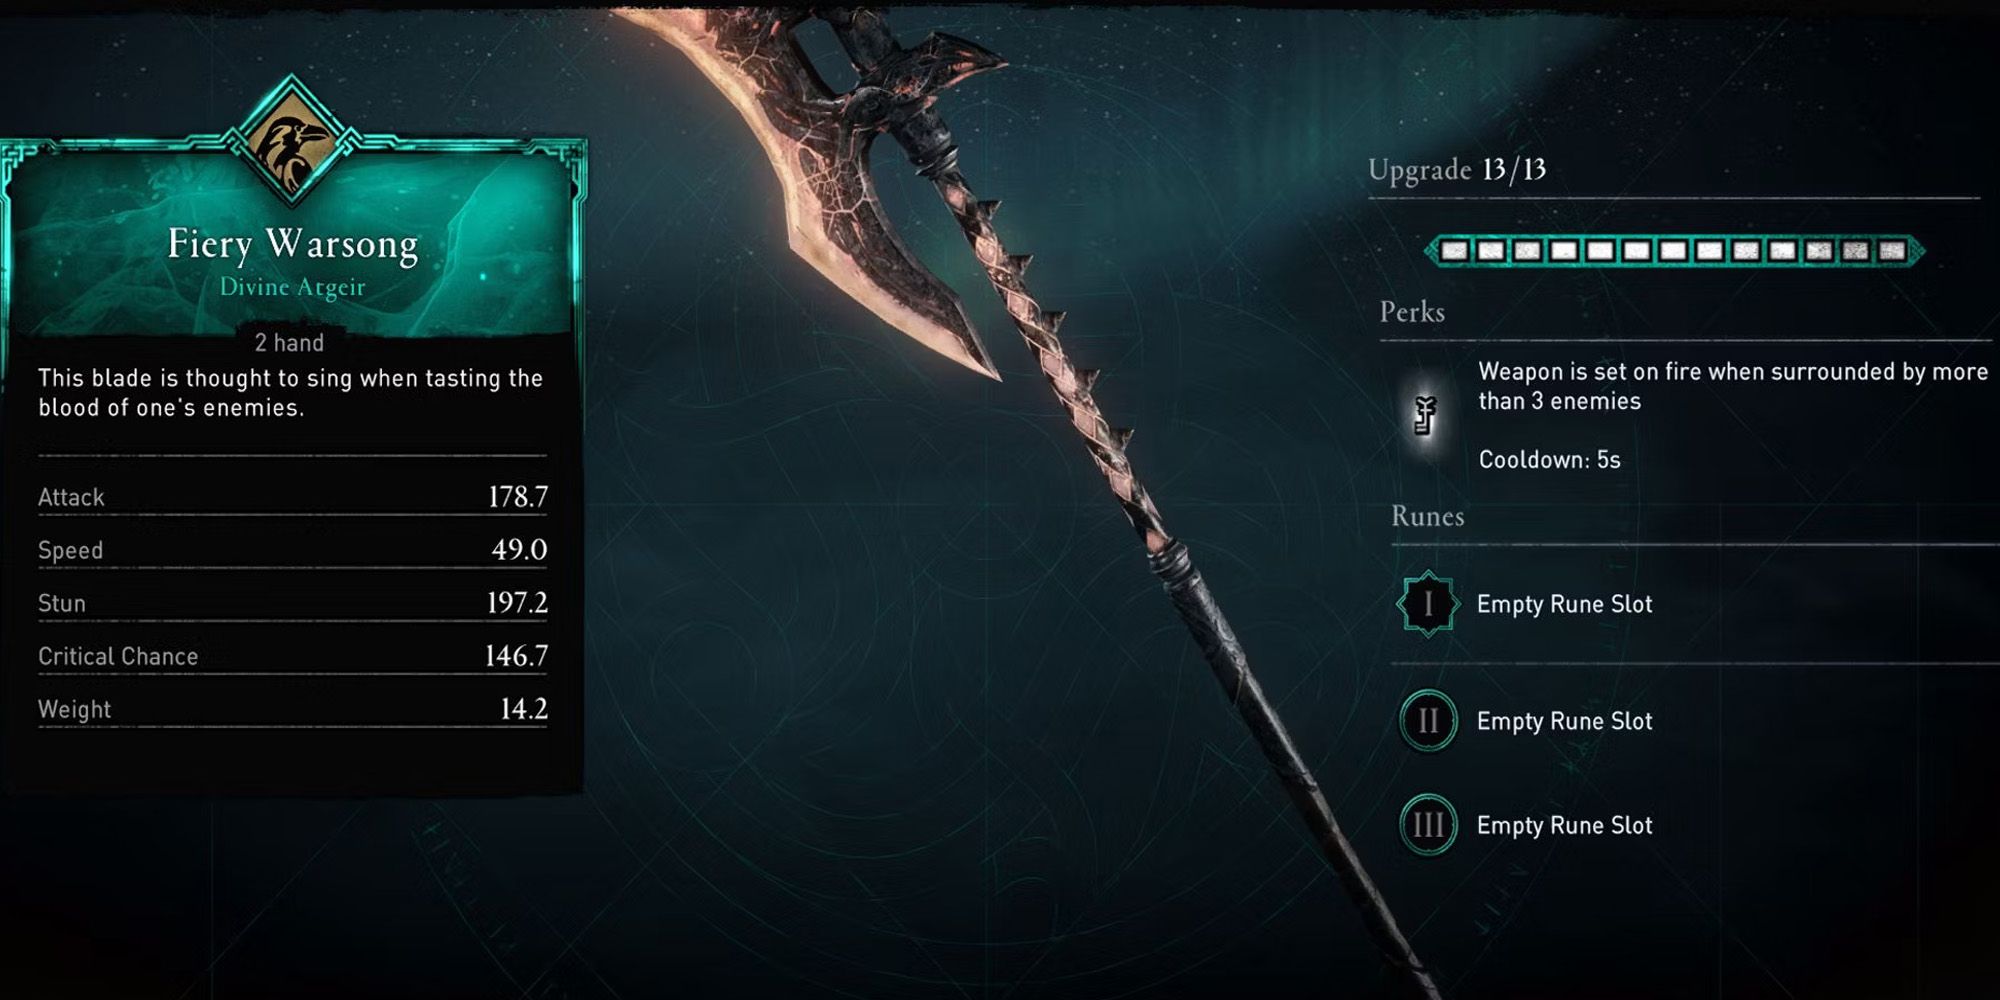 Image of the Fiery Warsong polearm and its stats in Assassin's Creed Valhalla